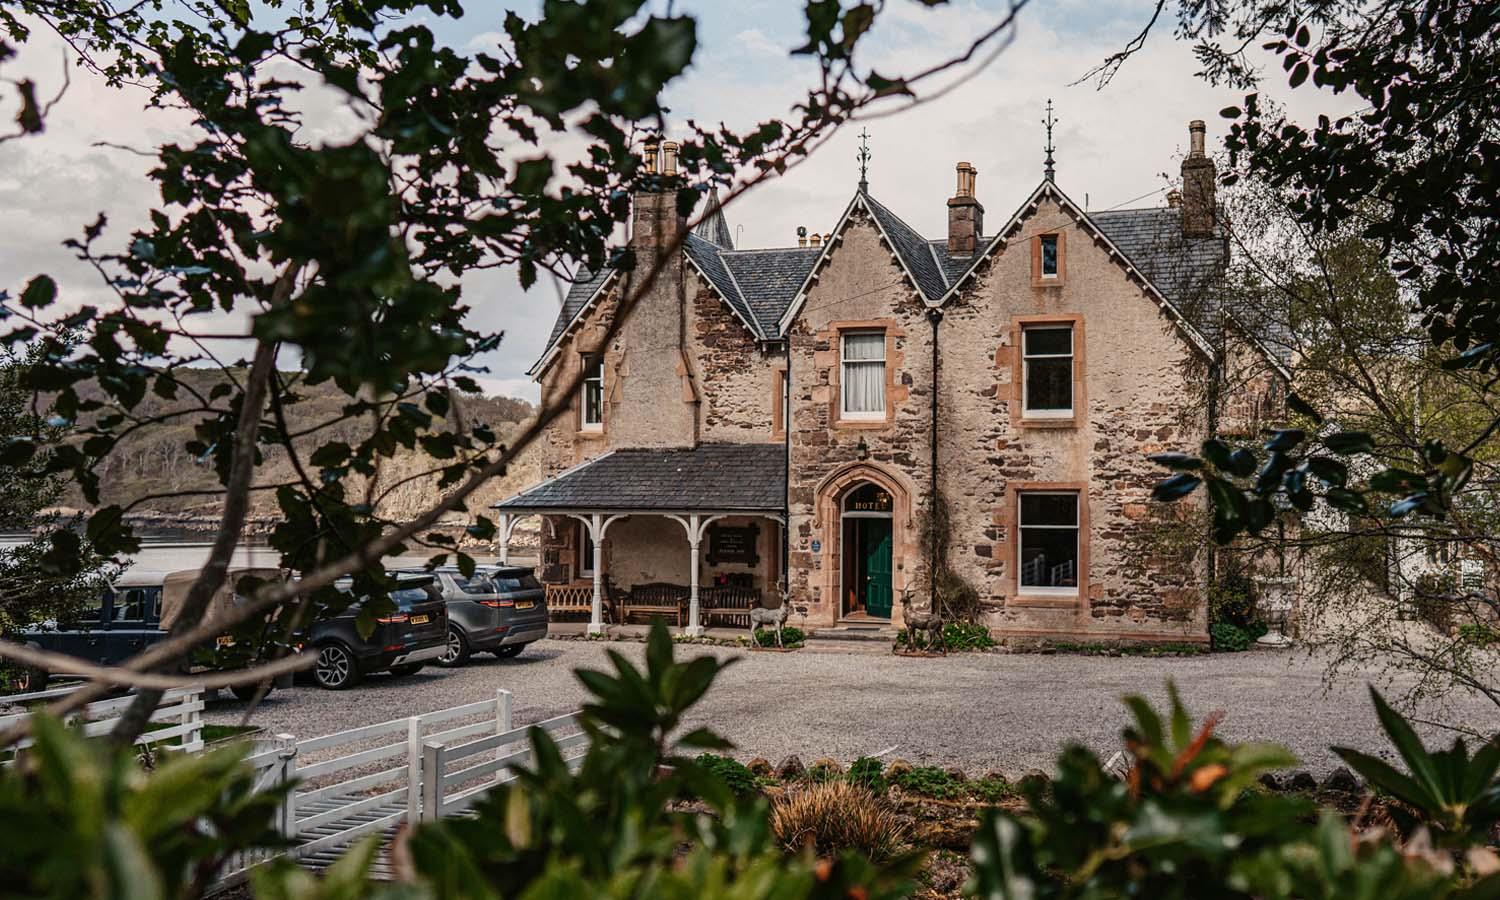 Shieldaig Lodge Hotel is full of character and charm